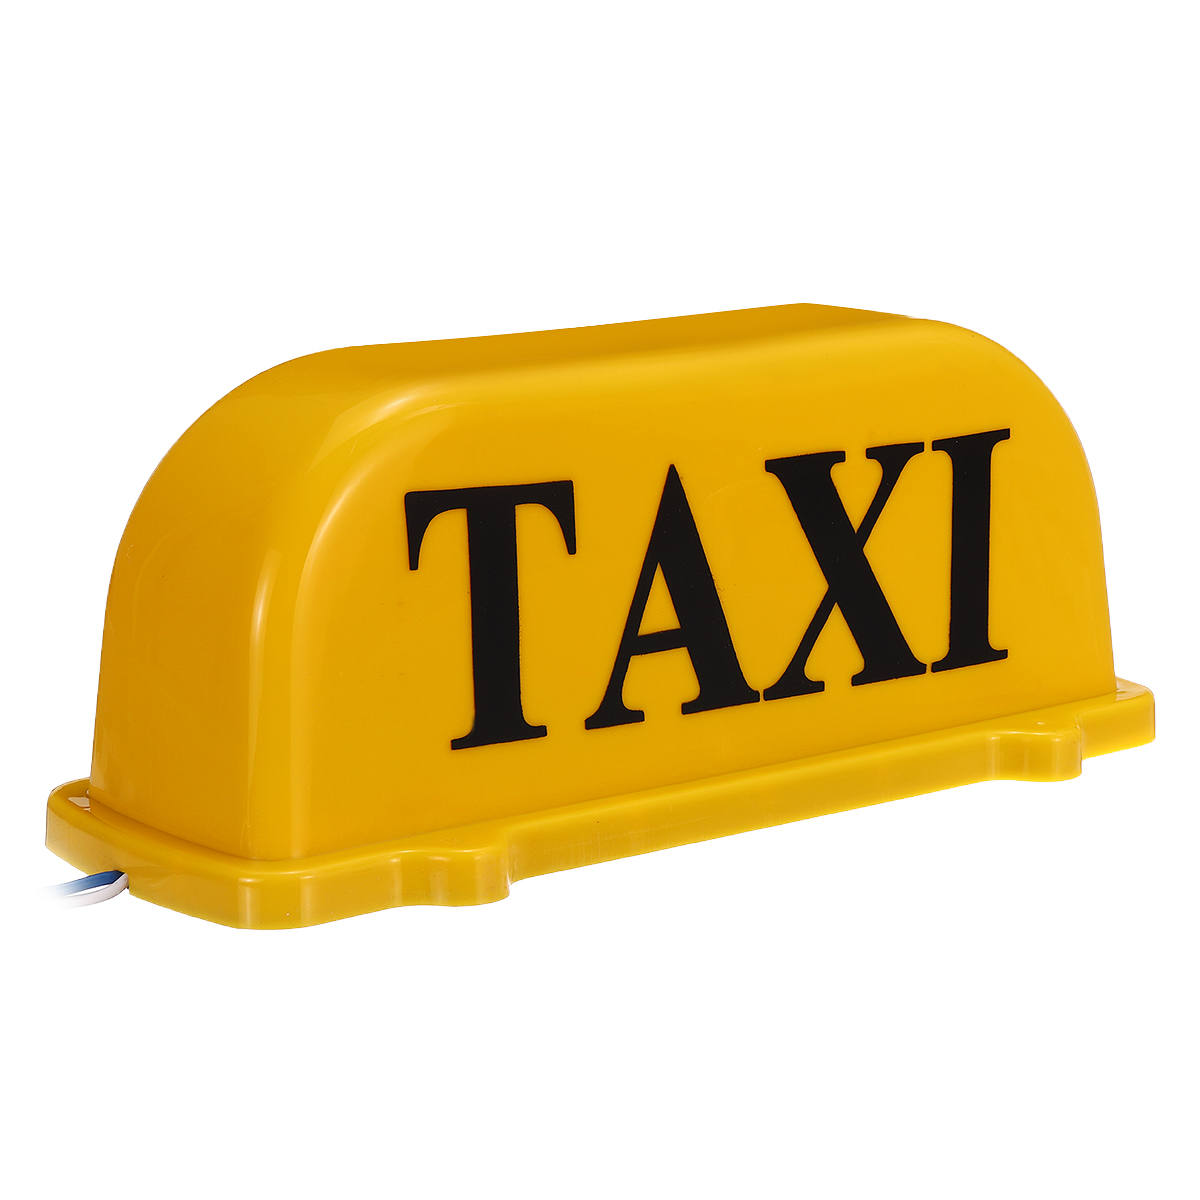 Universal 26Cm TAXI Cab Sign Car Magnetic Lamp Roof Top Topper Light Waterproof Yellow - Auto GoShop